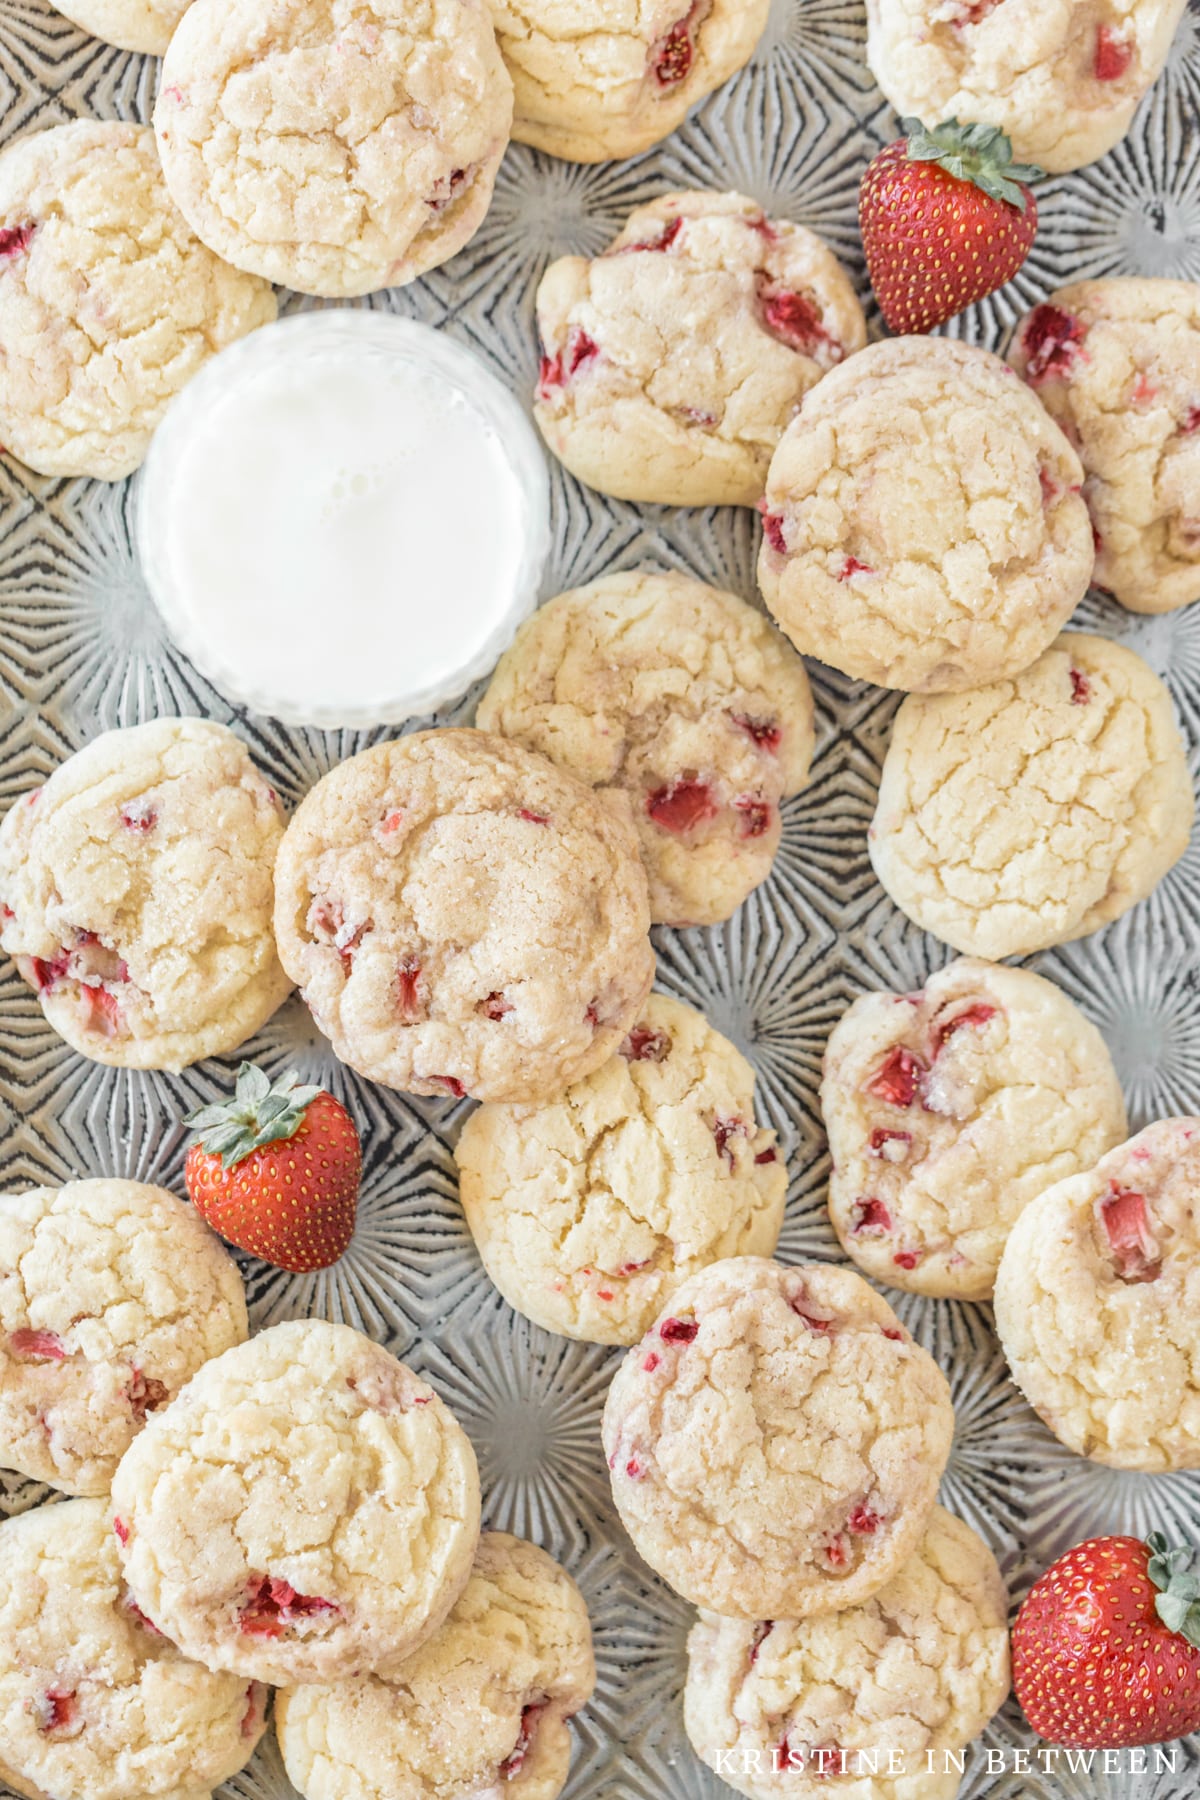 Strawberry sugar cookies laying on an antique cookie sheet with a glass of milk.